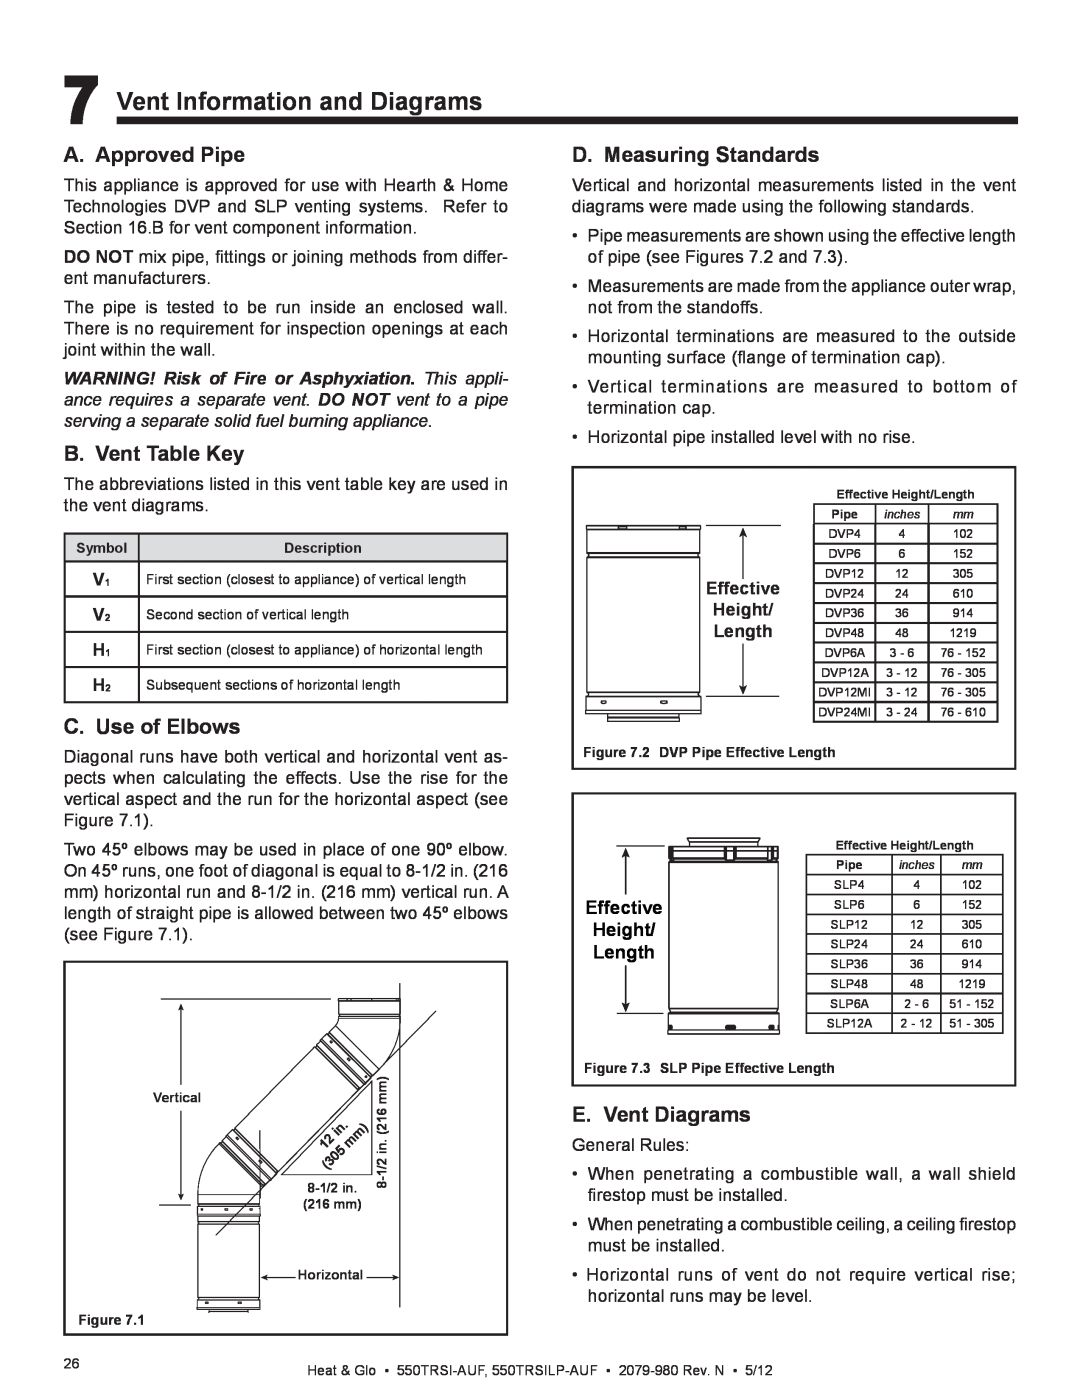 Heat & Glo LifeStyle 550TRSI-AUF Vent Information and Diagrams, A. Approved Pipe, B. Vent Table Key, C. Use of Elbows 